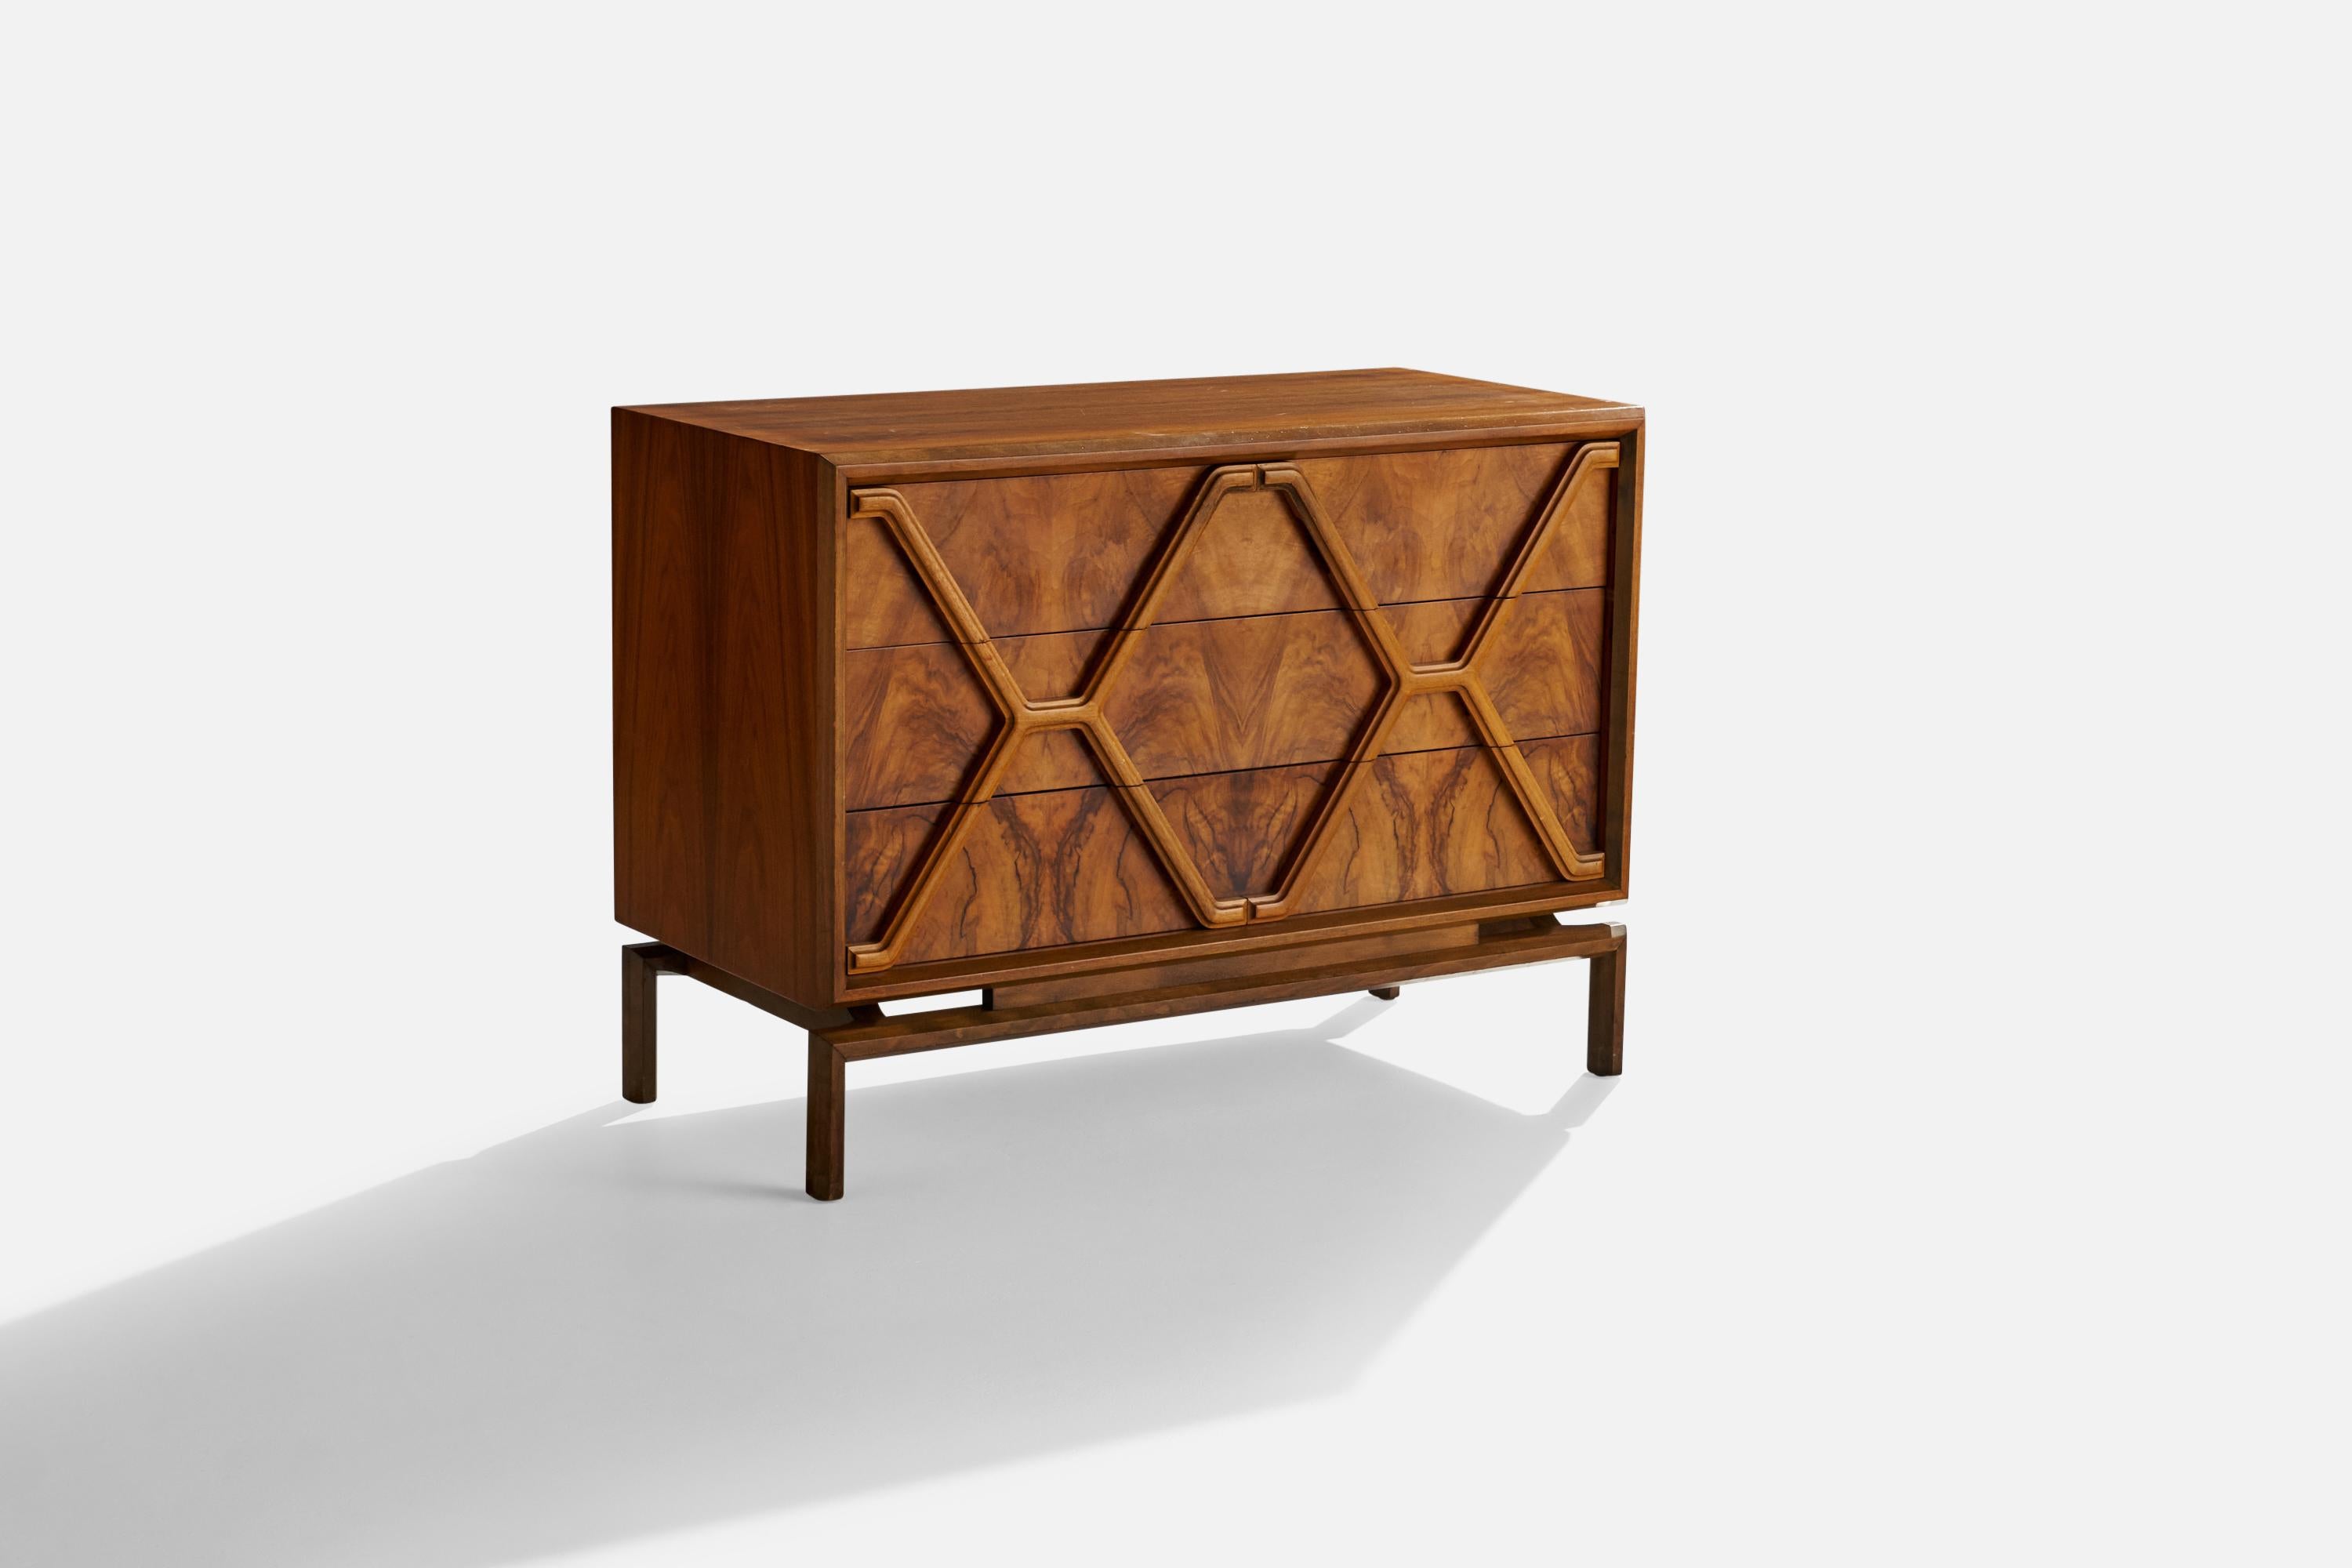 A rosewood chest of drawers or commode designed and produced by American designer Edmond J. Spence and produced in Sweden, c. 1950s.